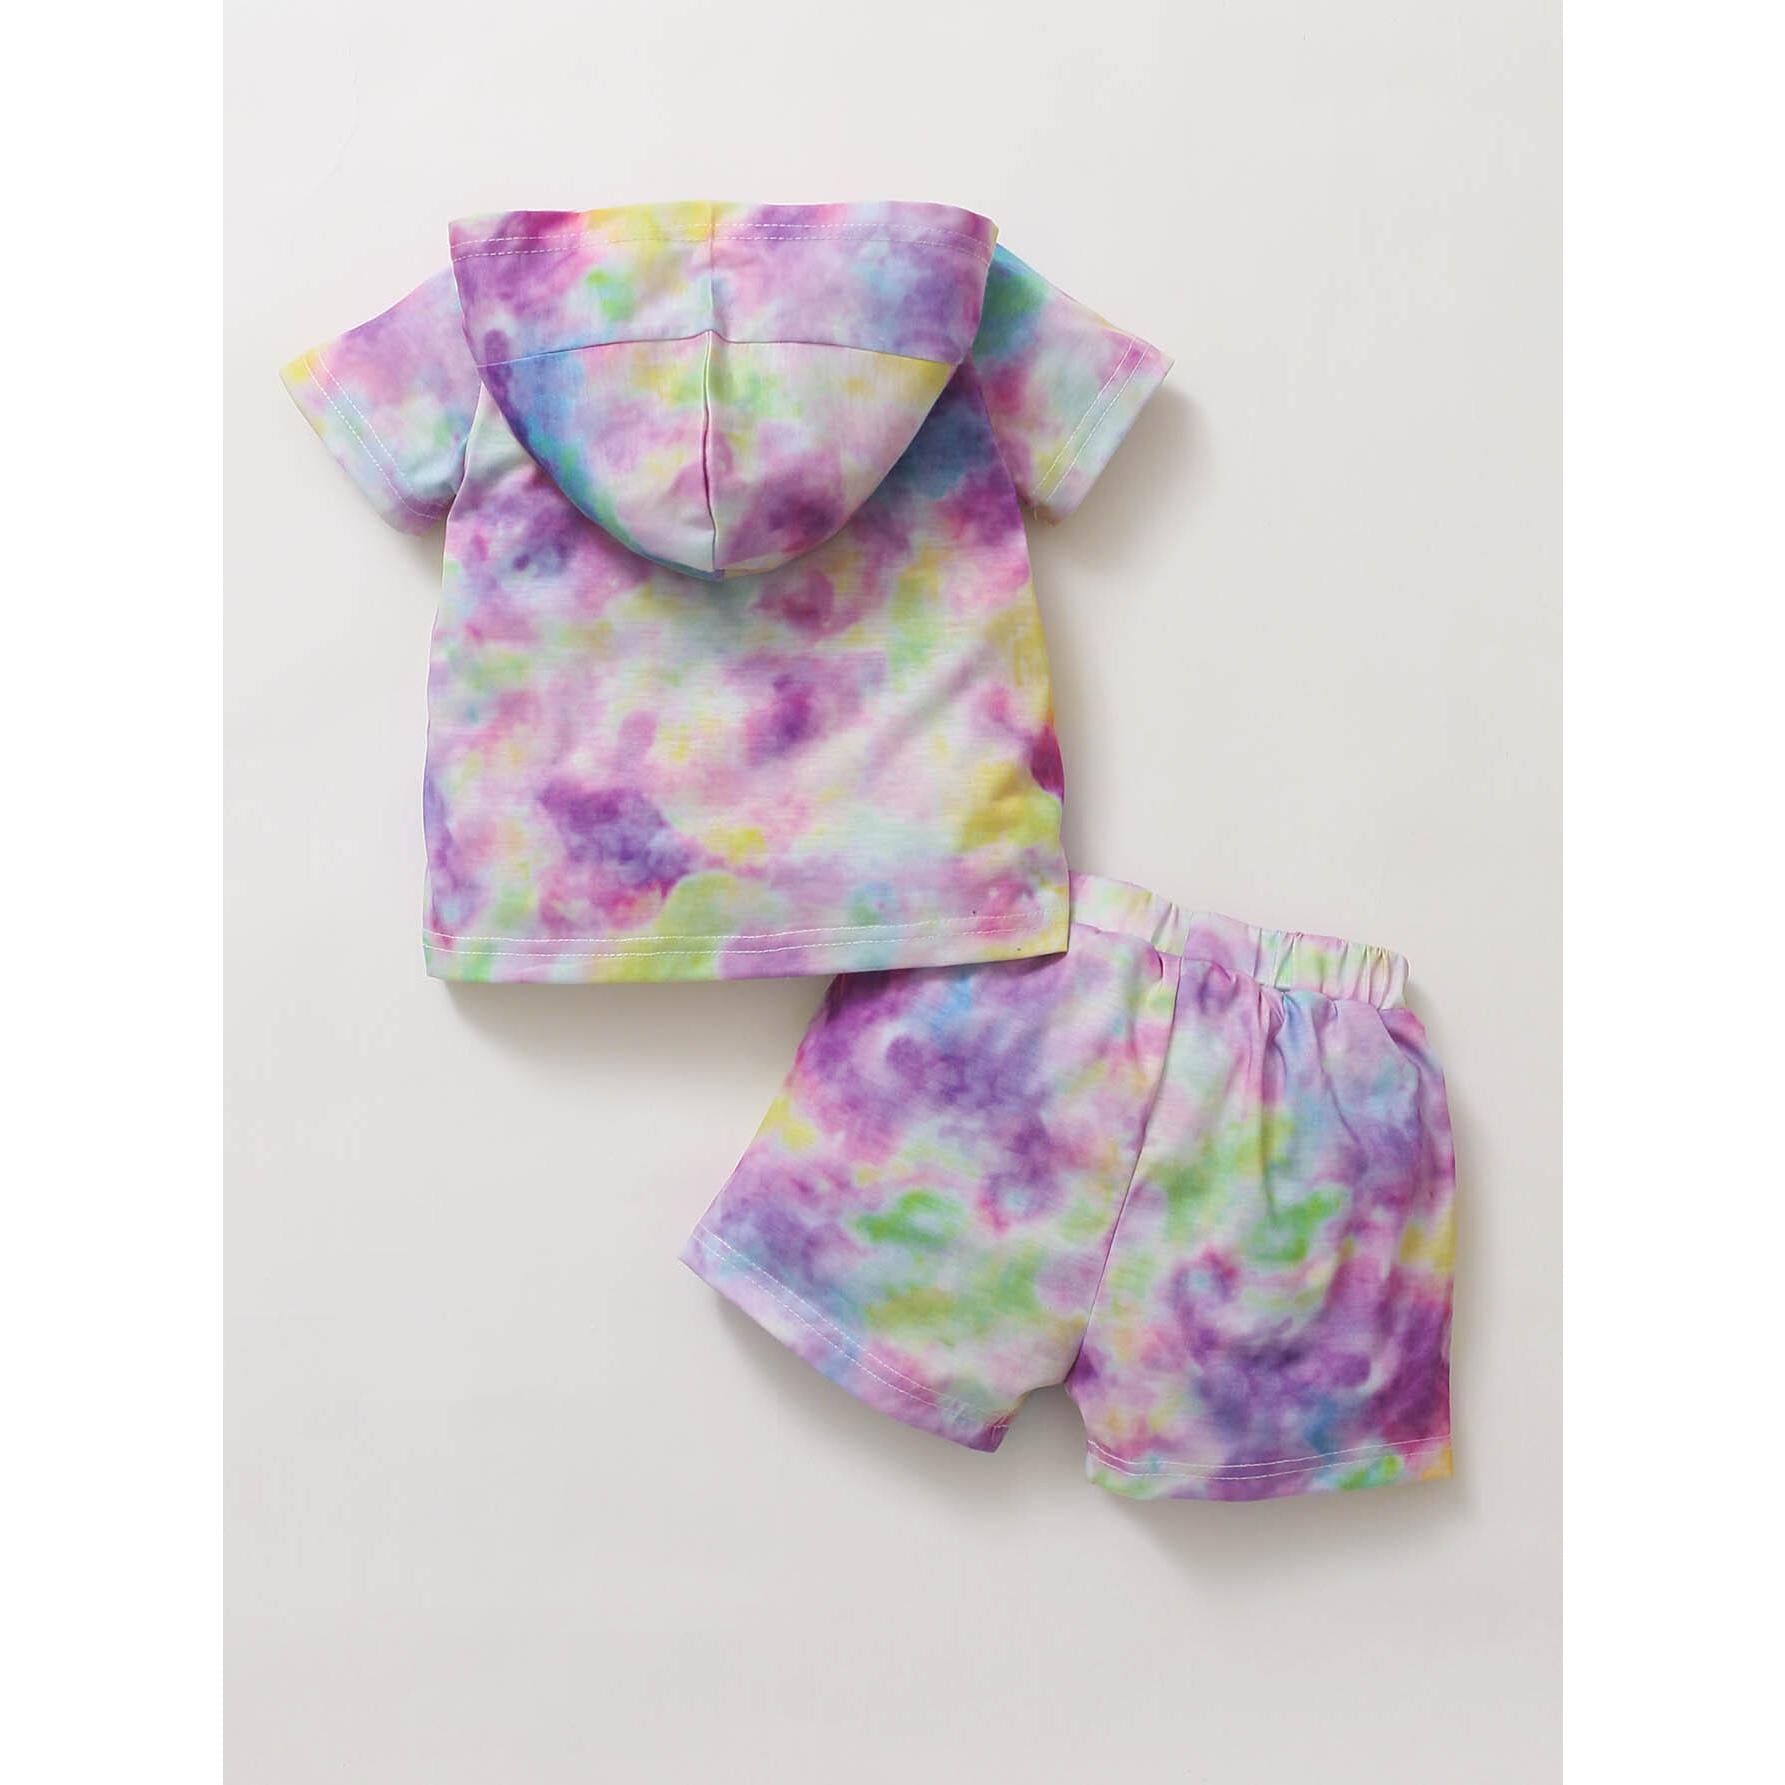 3-24M Kids Fashion Girl Clothes Shorts Outfits Tie-dyed Hooded Short Sleeve Shirt Top Shorts  Set Catpapa 22011261